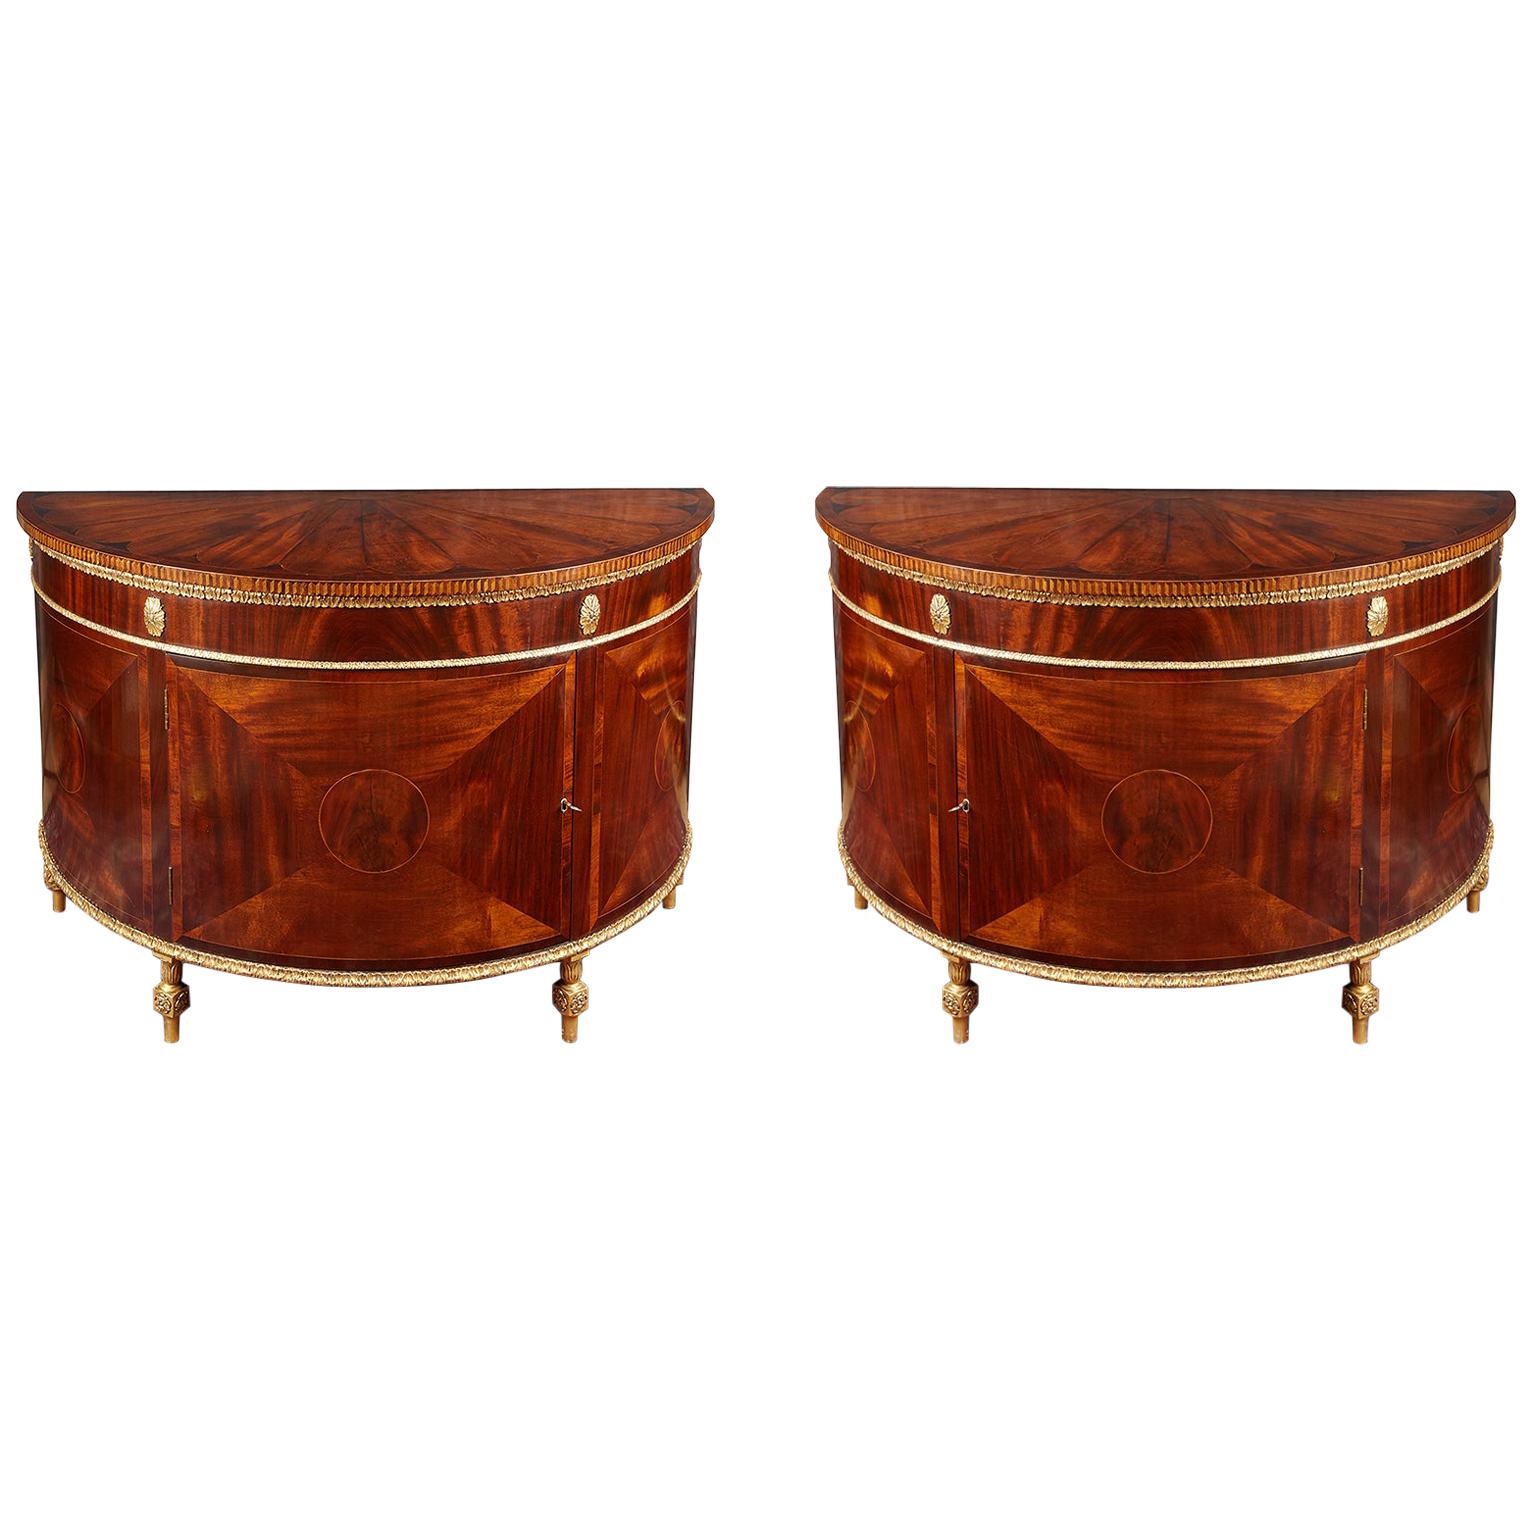 Late 18th Century George III Pair of Demilune Commodes